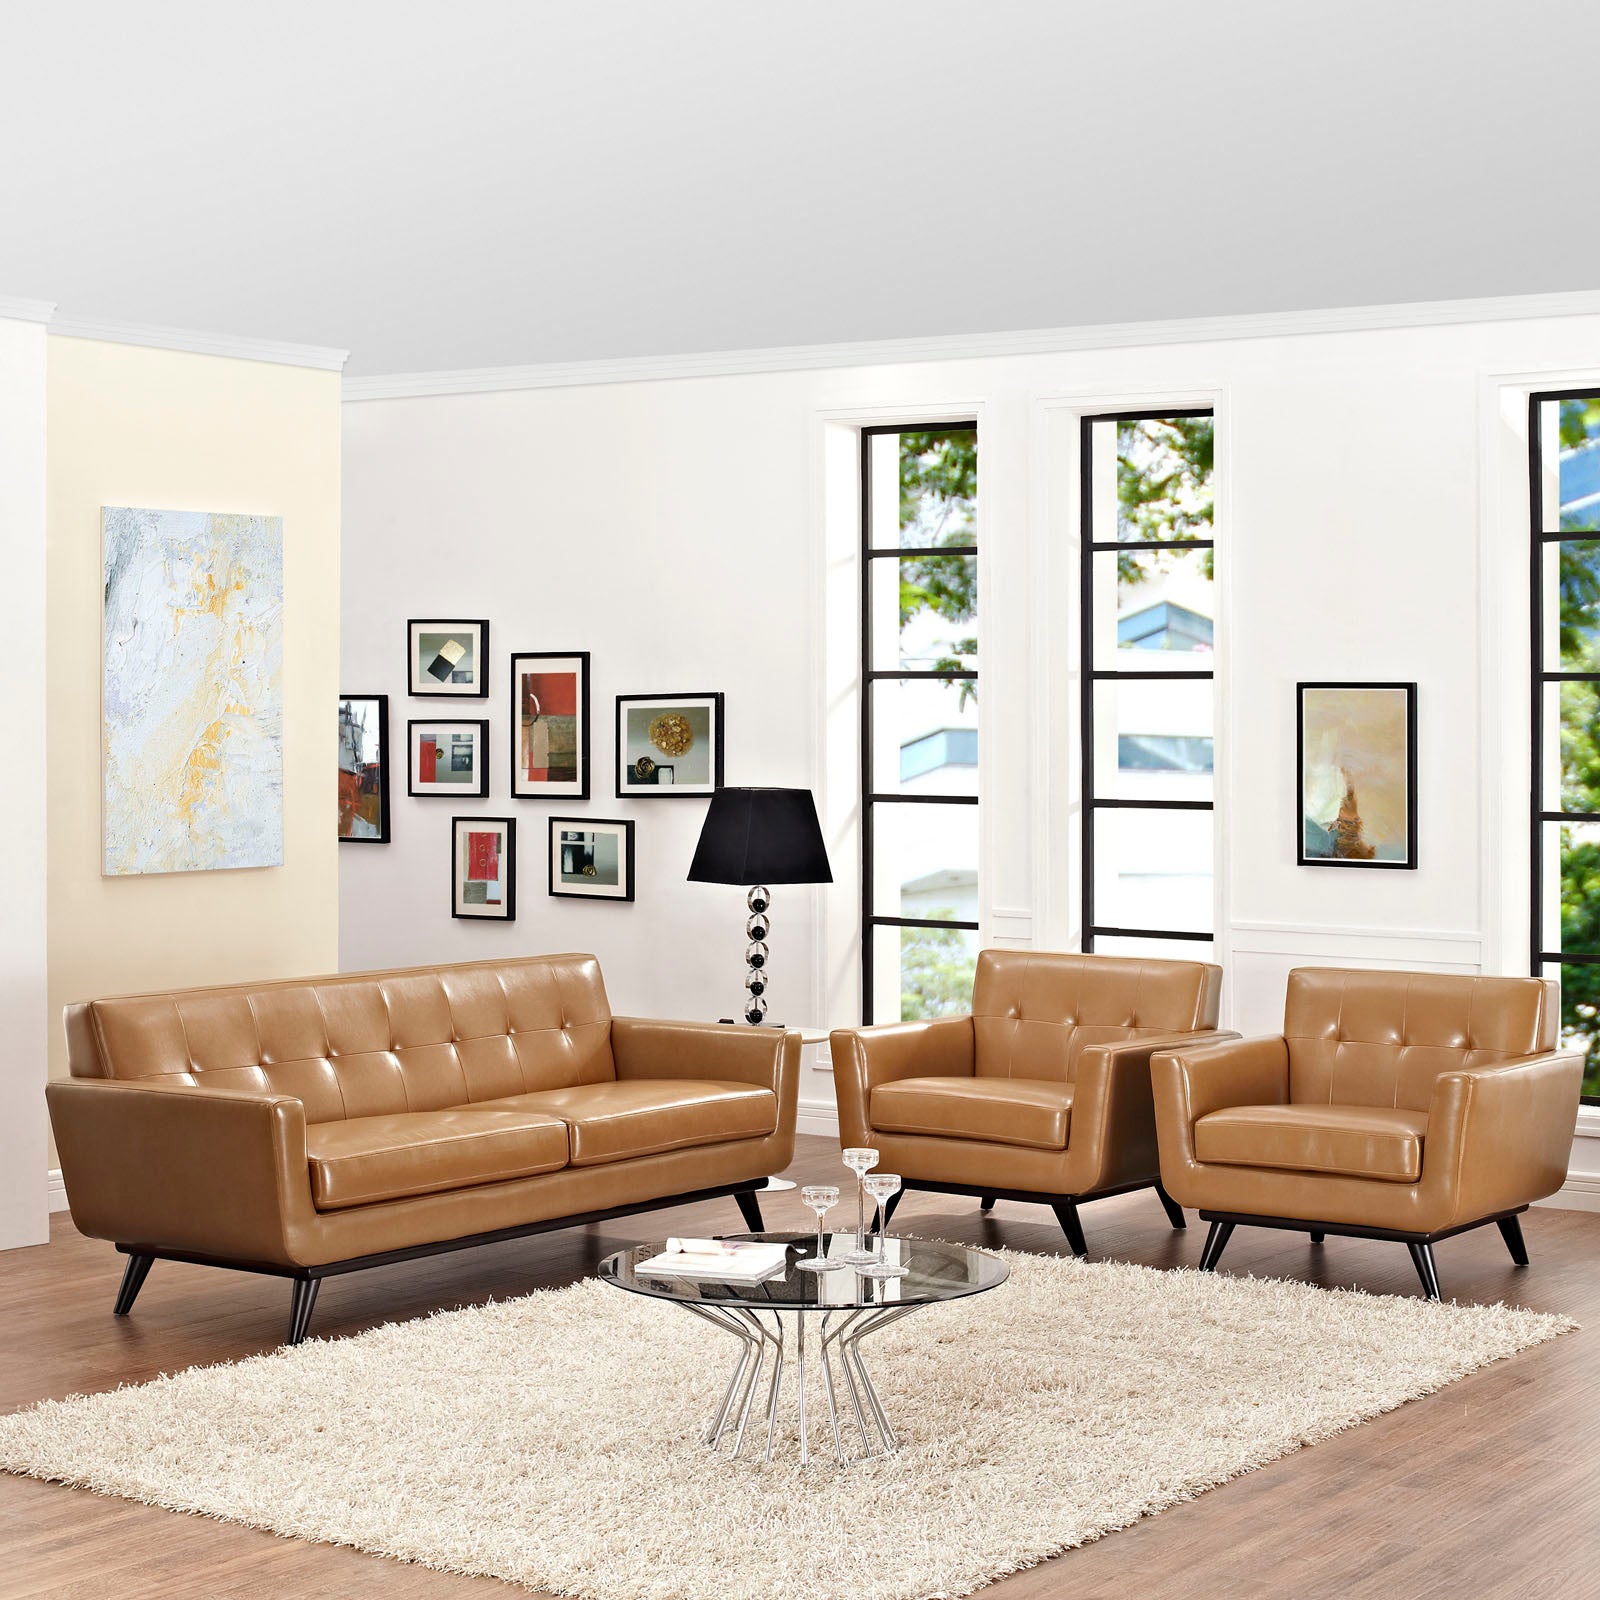 Modway Living Room Sets - Engage 3 Piece Leather Living Room Set Tan